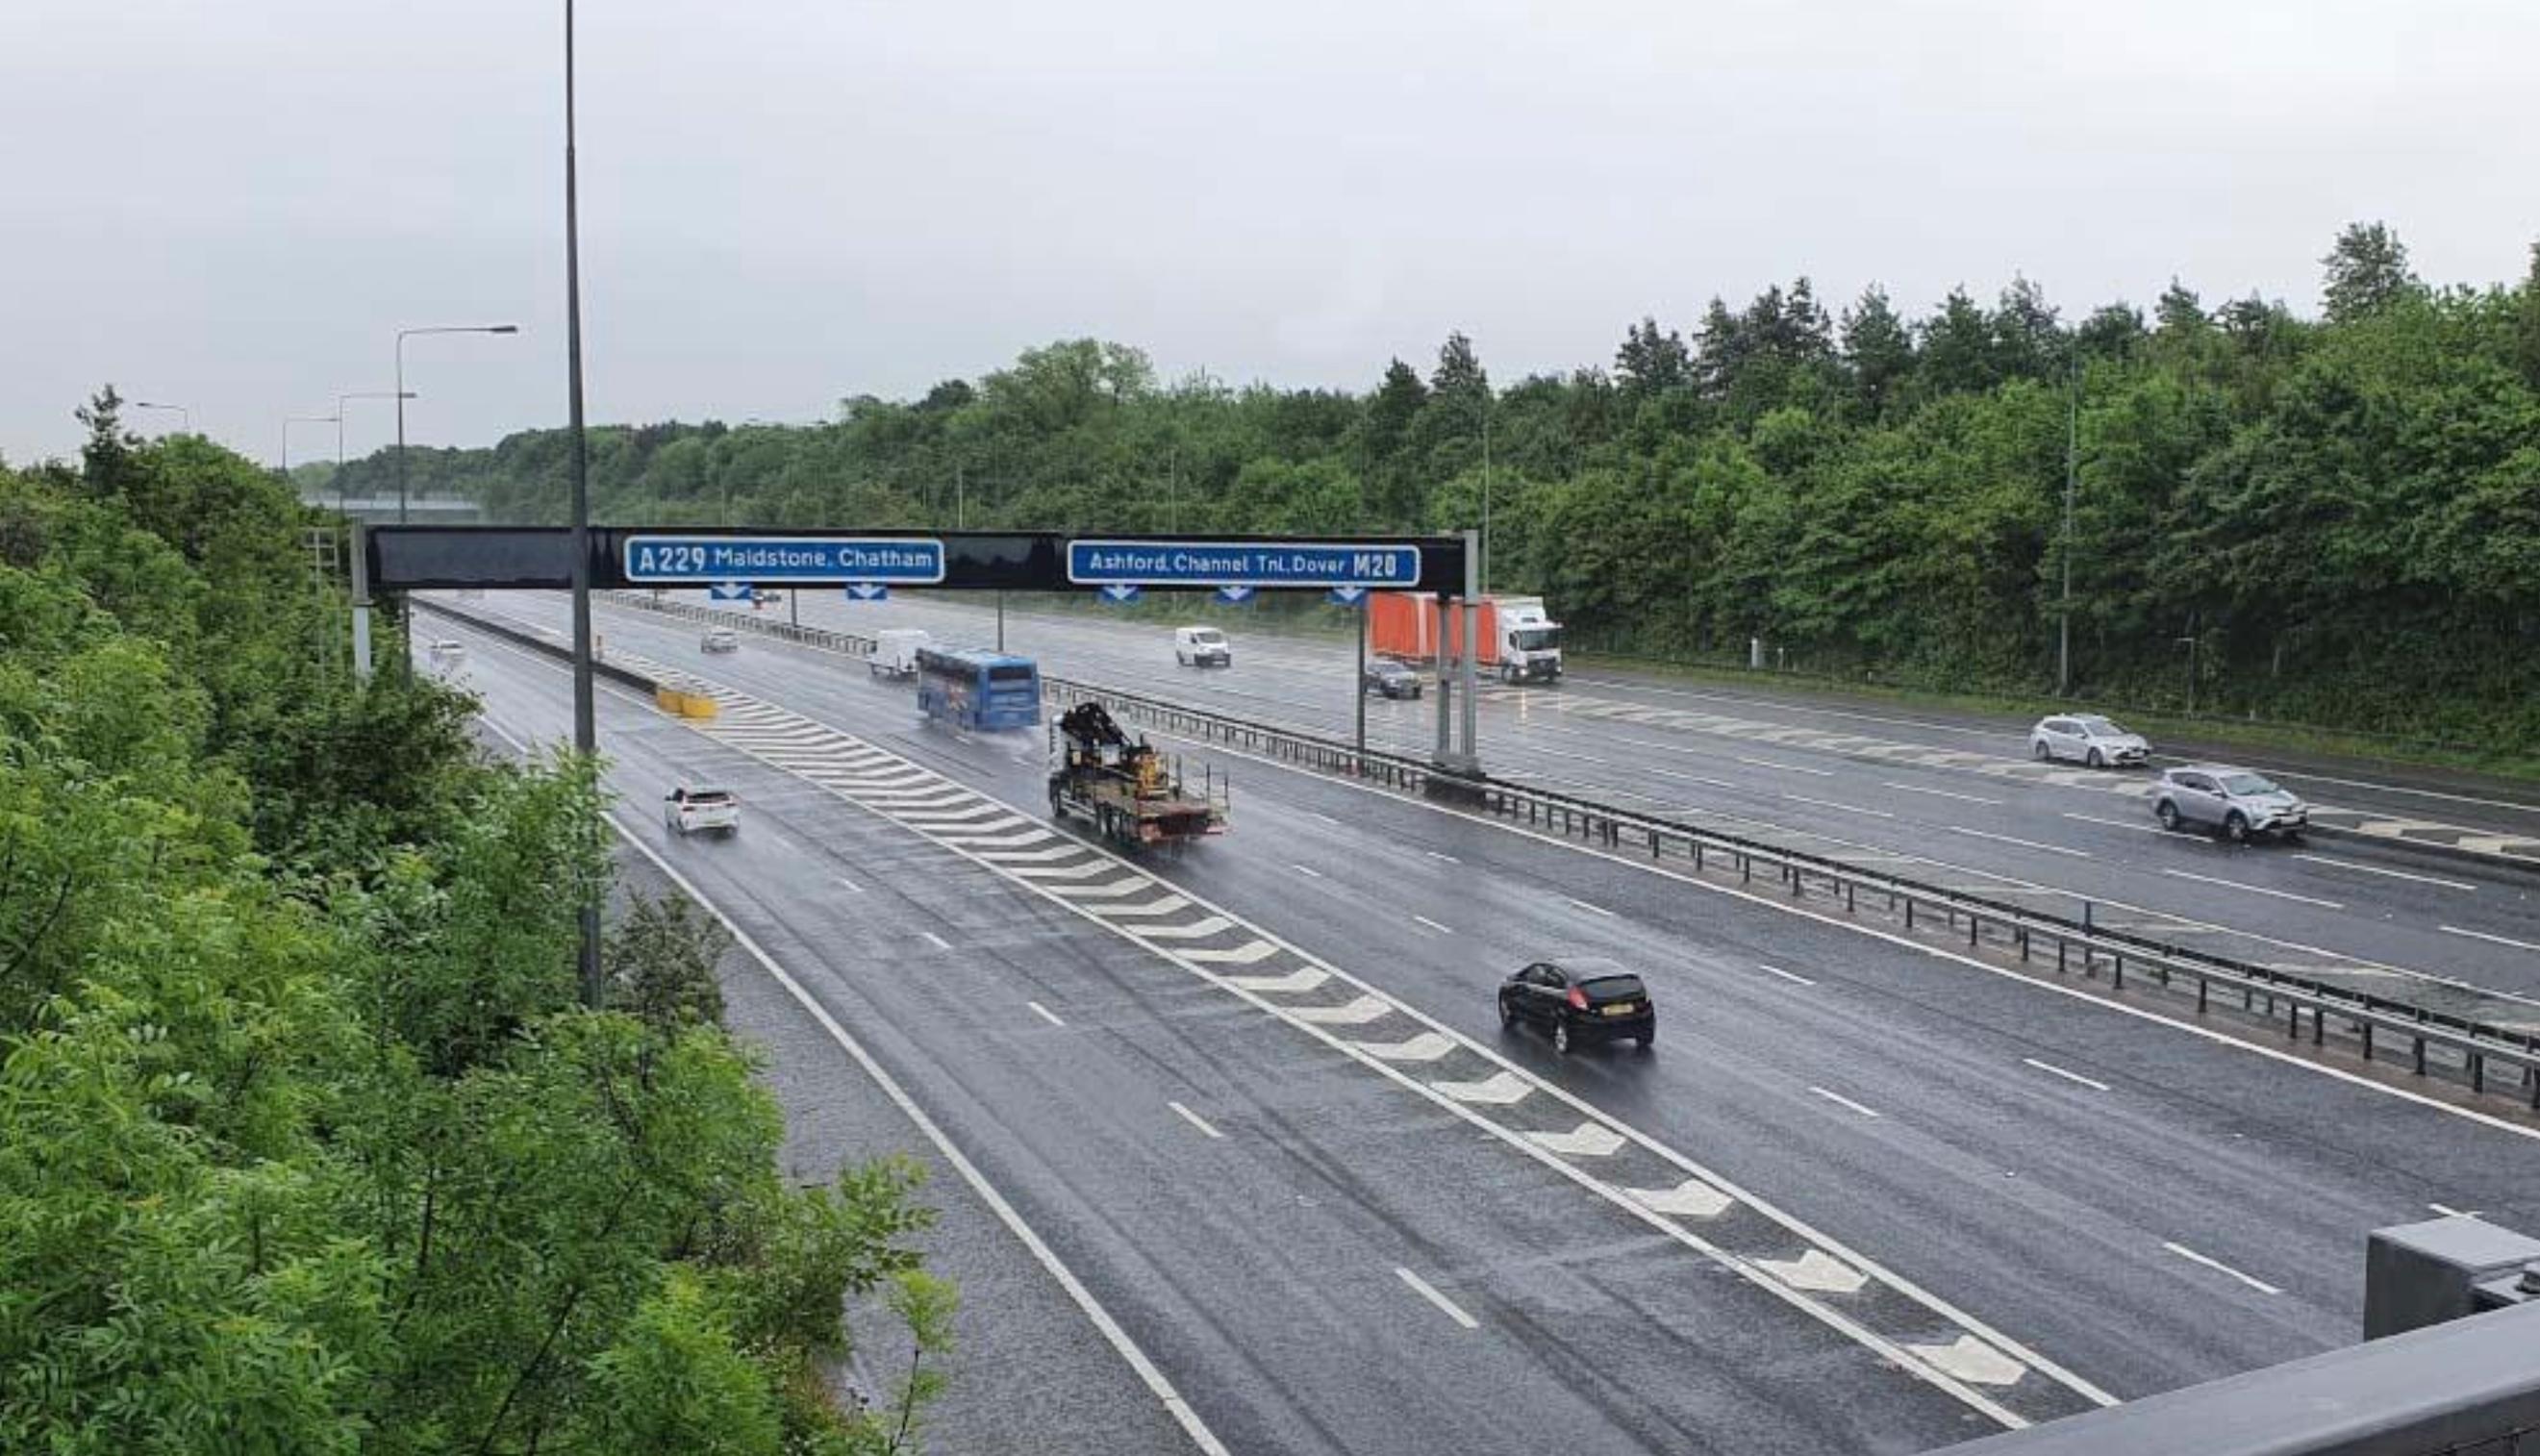 National Highways is a government company which plans, designs, builds, operates and maintains England’s motorways and major A roads, known as the strategic road network (SRN)